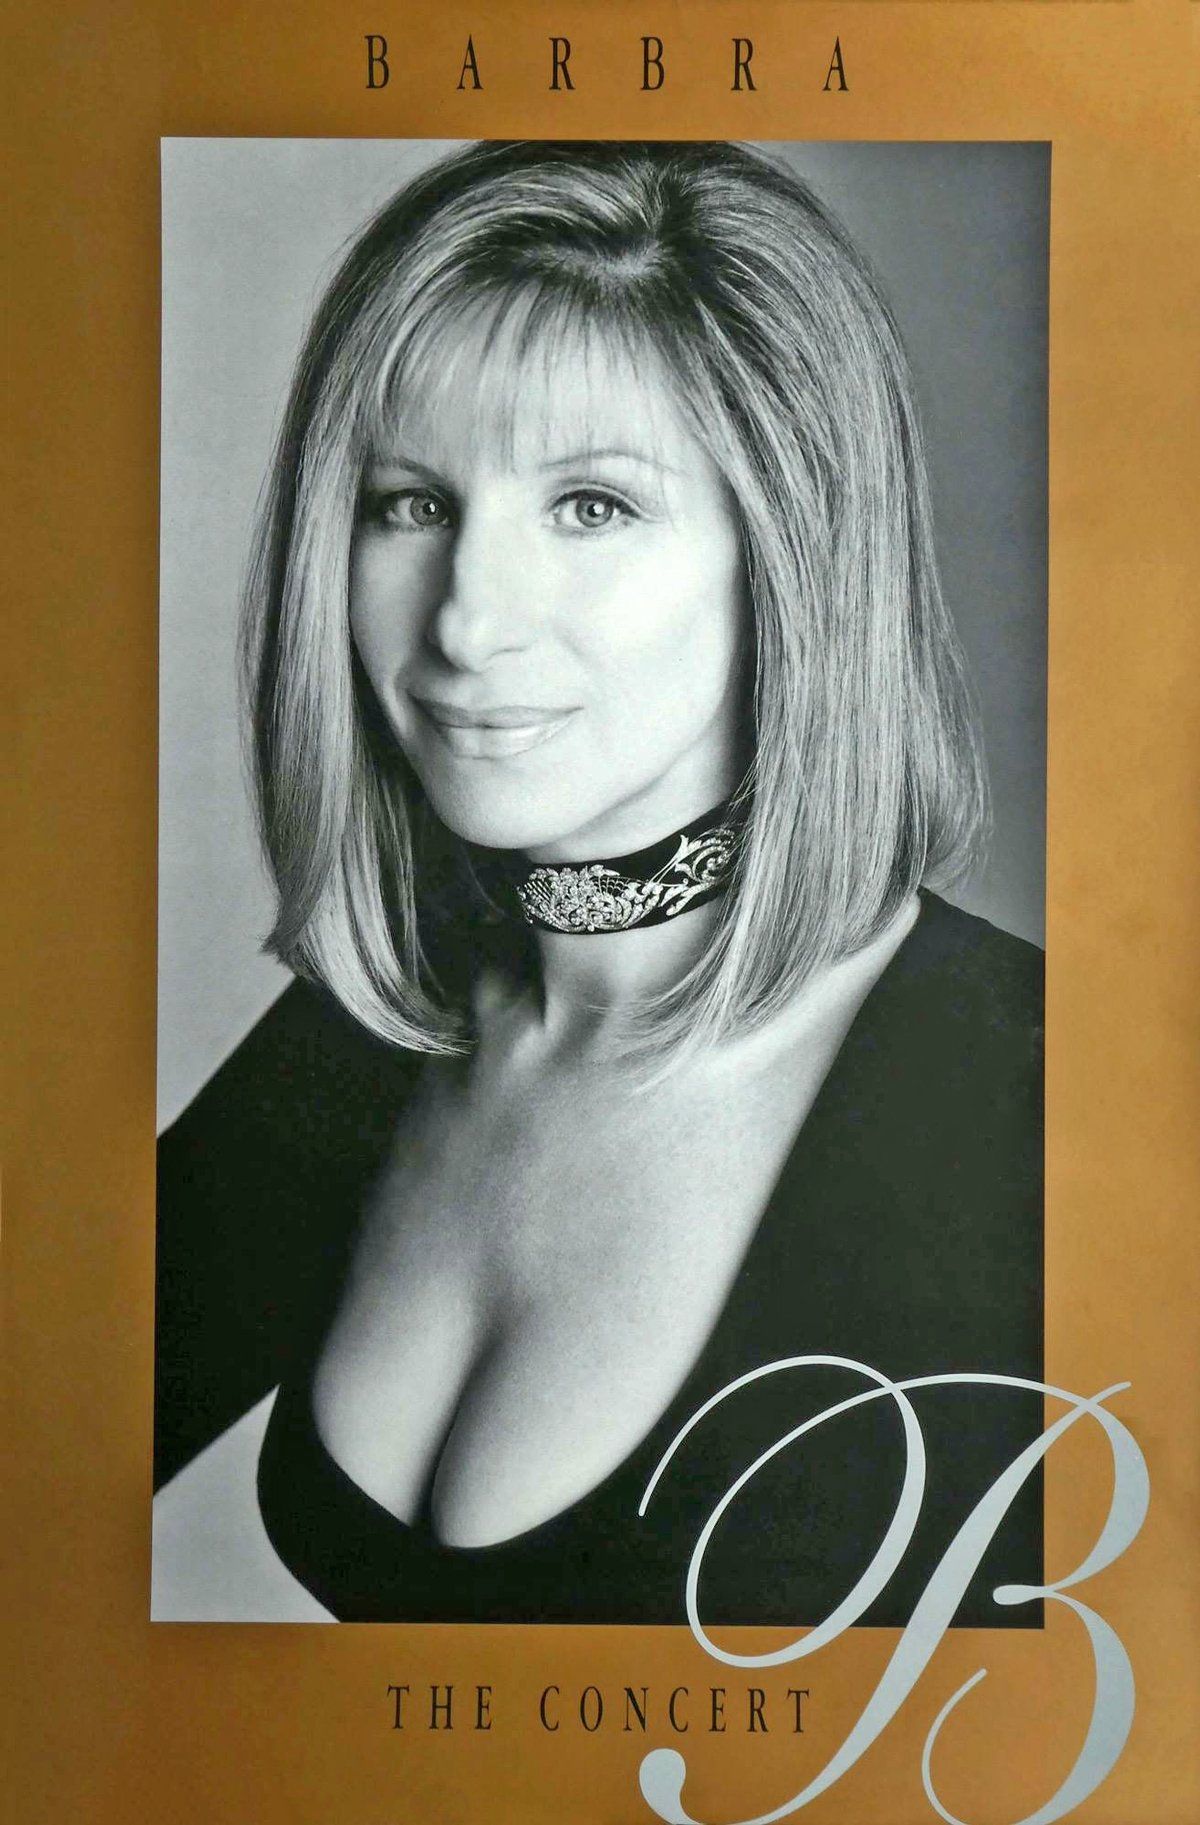 Official poster of Barbra Streisand for the 1994 tour